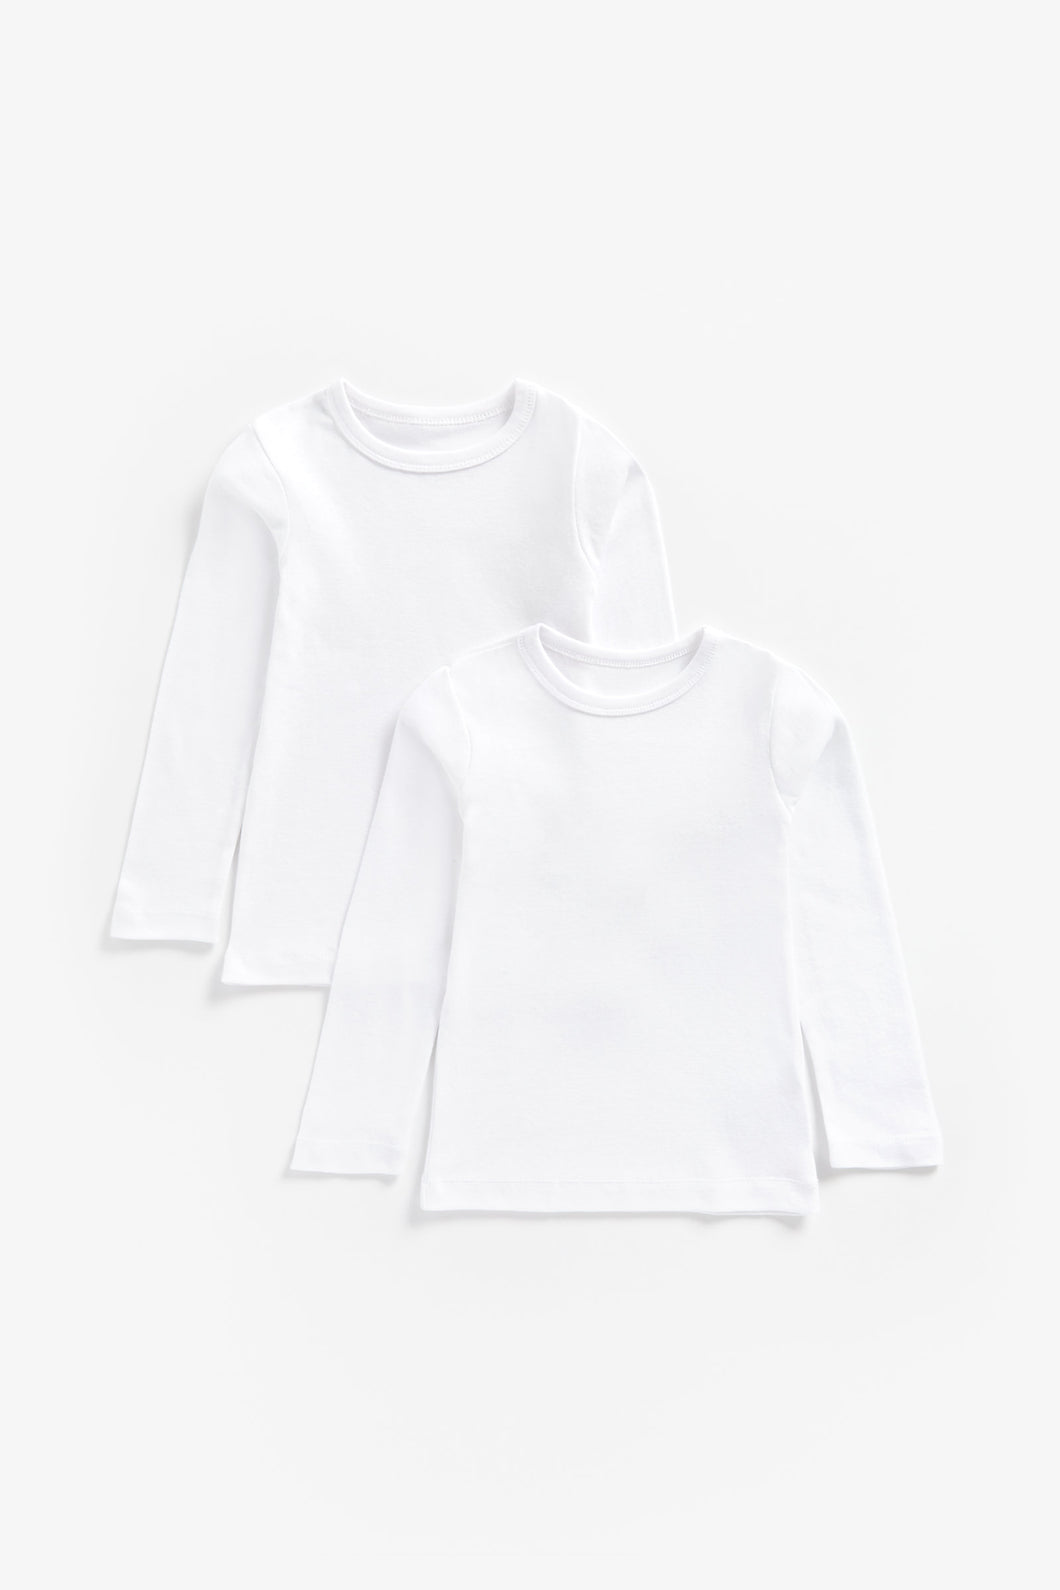 Mothercare white vests - 2 pack